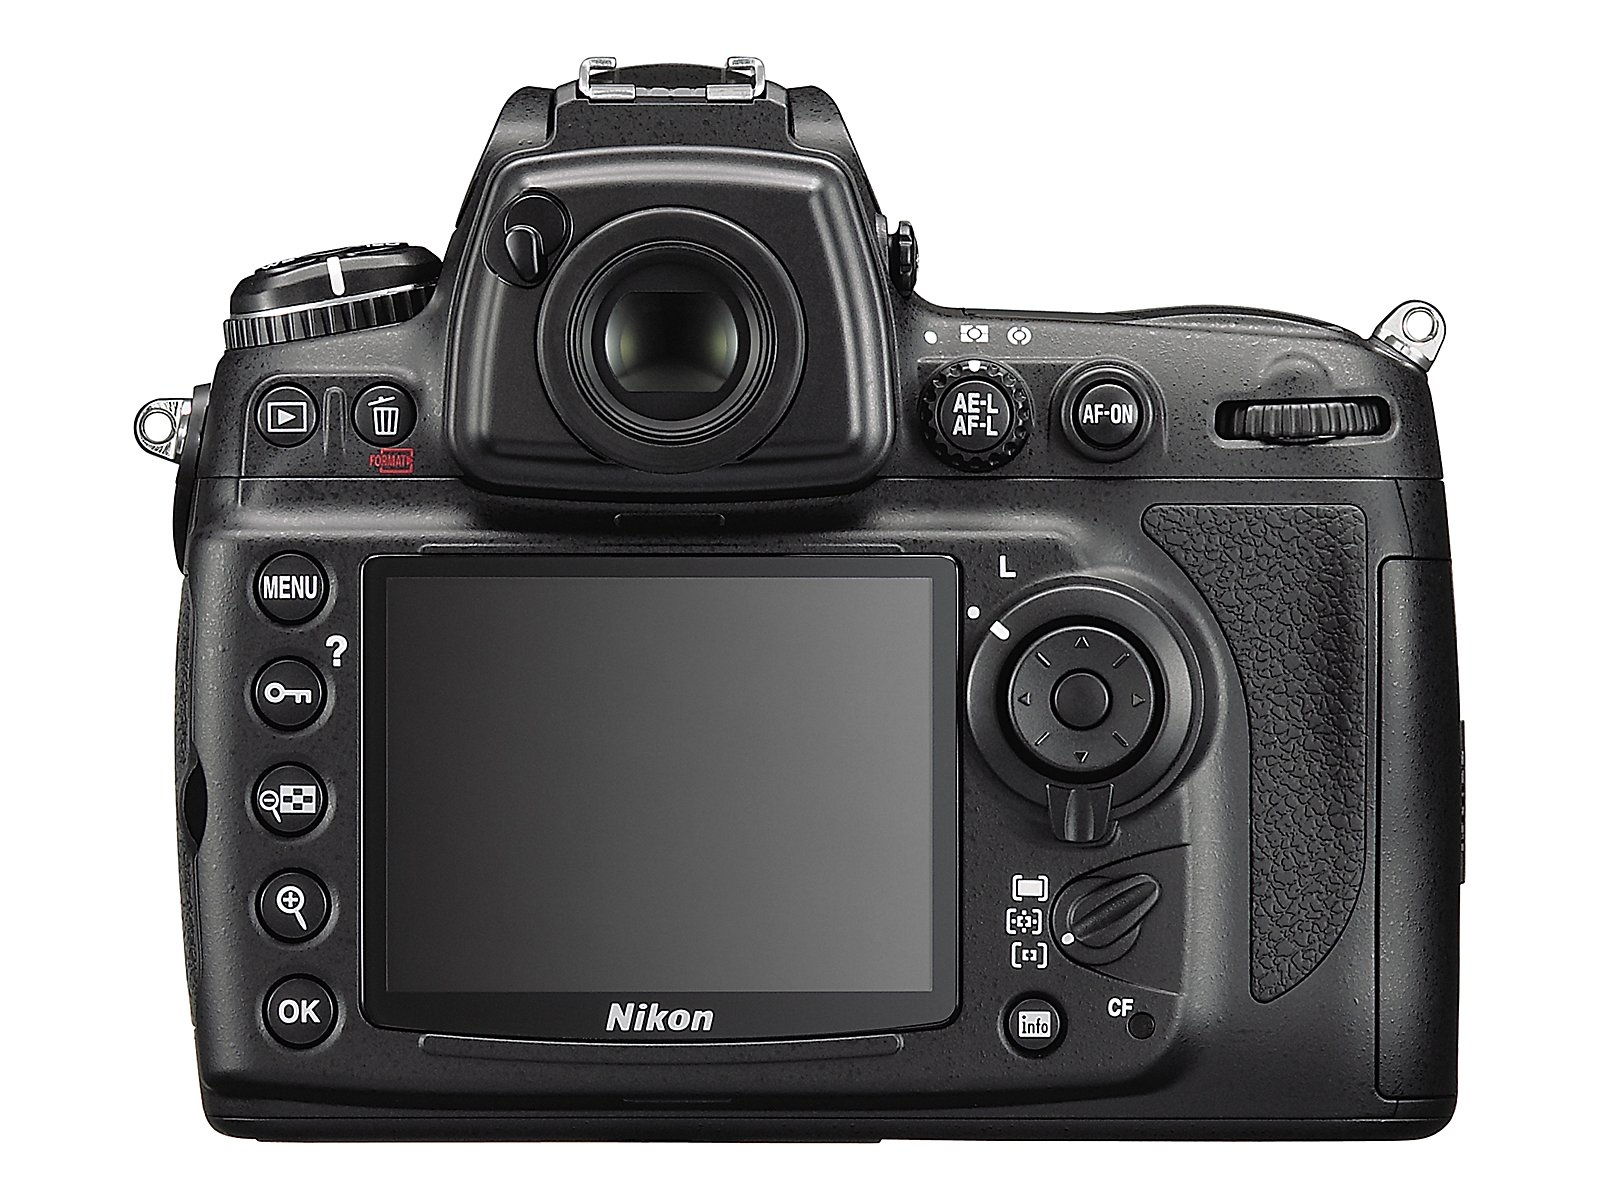 Nikon D700 12.1MP FX-Format CMOS Digital SLR Camera with 3.0-Inch LCD (Body Only) (OLD MODEL)